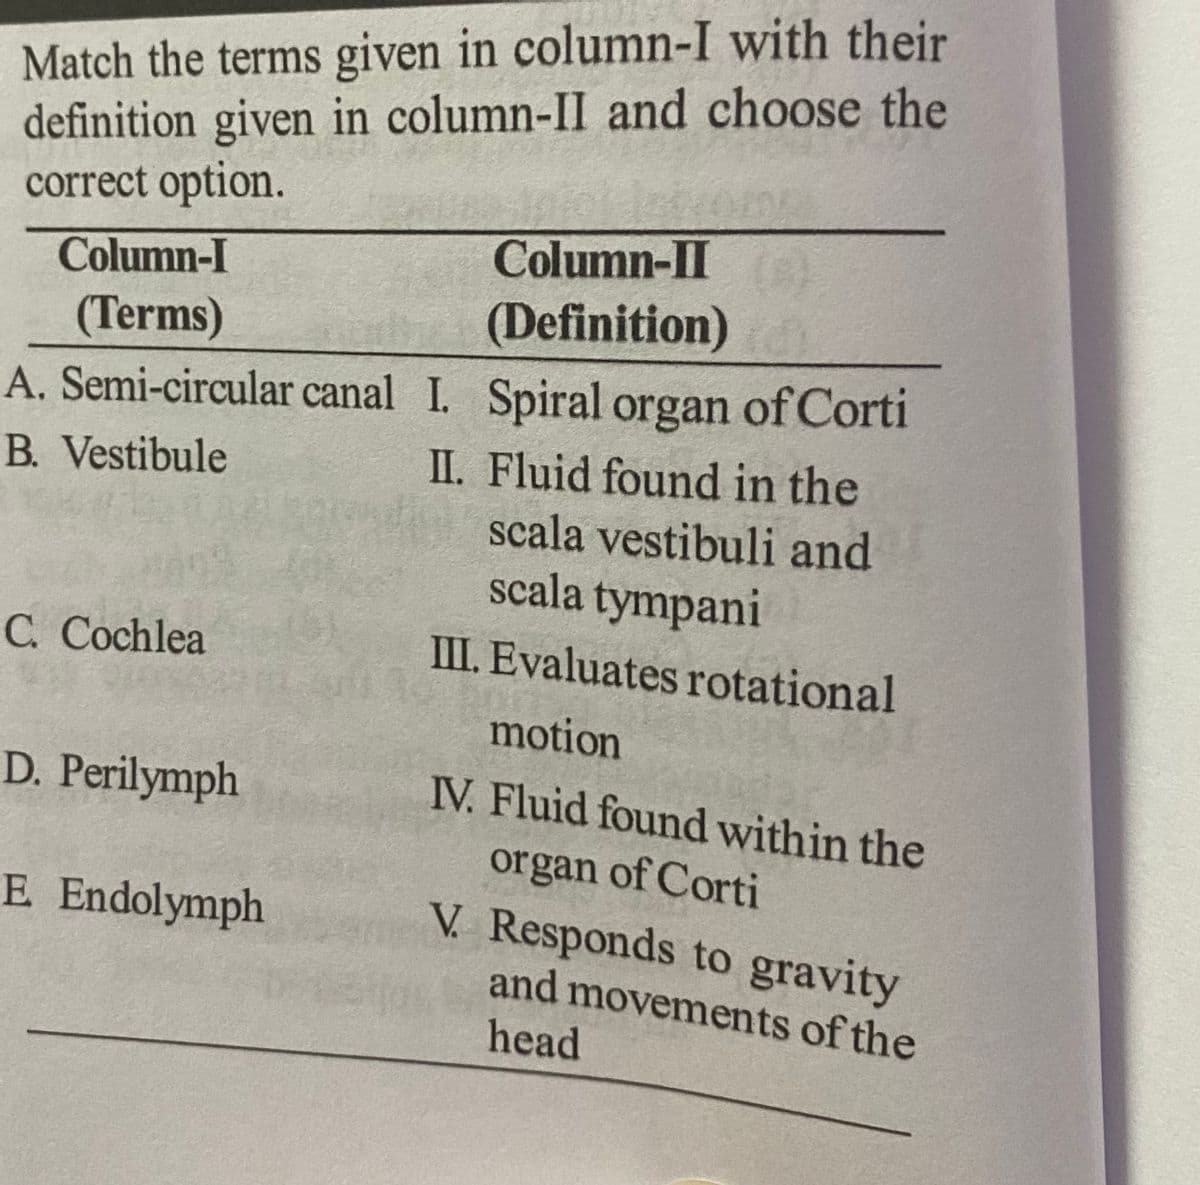 Match the terms given in column-I with their
definition given in column-II and choose the
correct option.
Column-I
(Terms)
A. Semi-circular canal I. Spiral organ of Corti
B. Vestibule
II.
Fluid found in the
scala vestibuli and
scala tympani
C. Cochlea
D. Perilymph
Column-II
(Definition)
E Endolymph
III. Evaluates rotational
motion
IV. Fluid found within the
organ of Corti
V. Responds to gravity
and movements of the
head